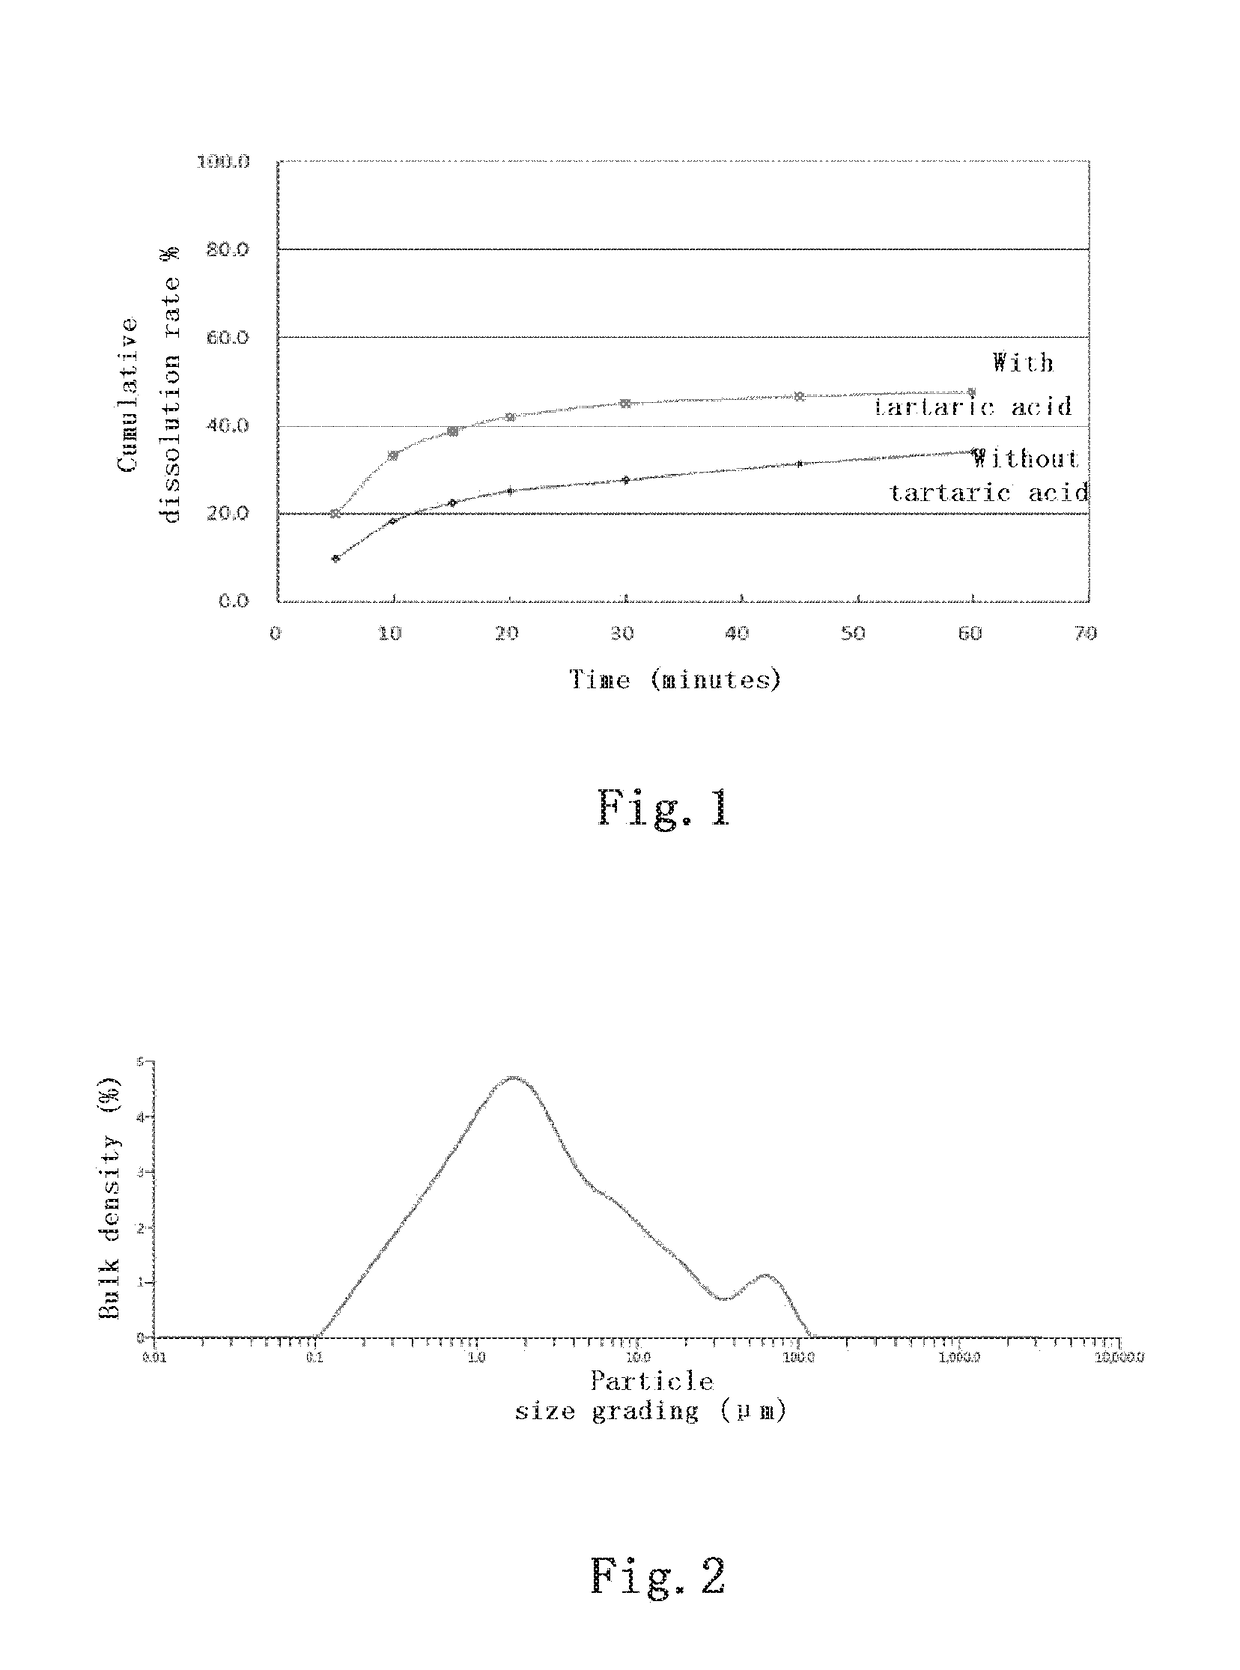 Pharmaceutical formulation of palbociclib and a preparation method thereof